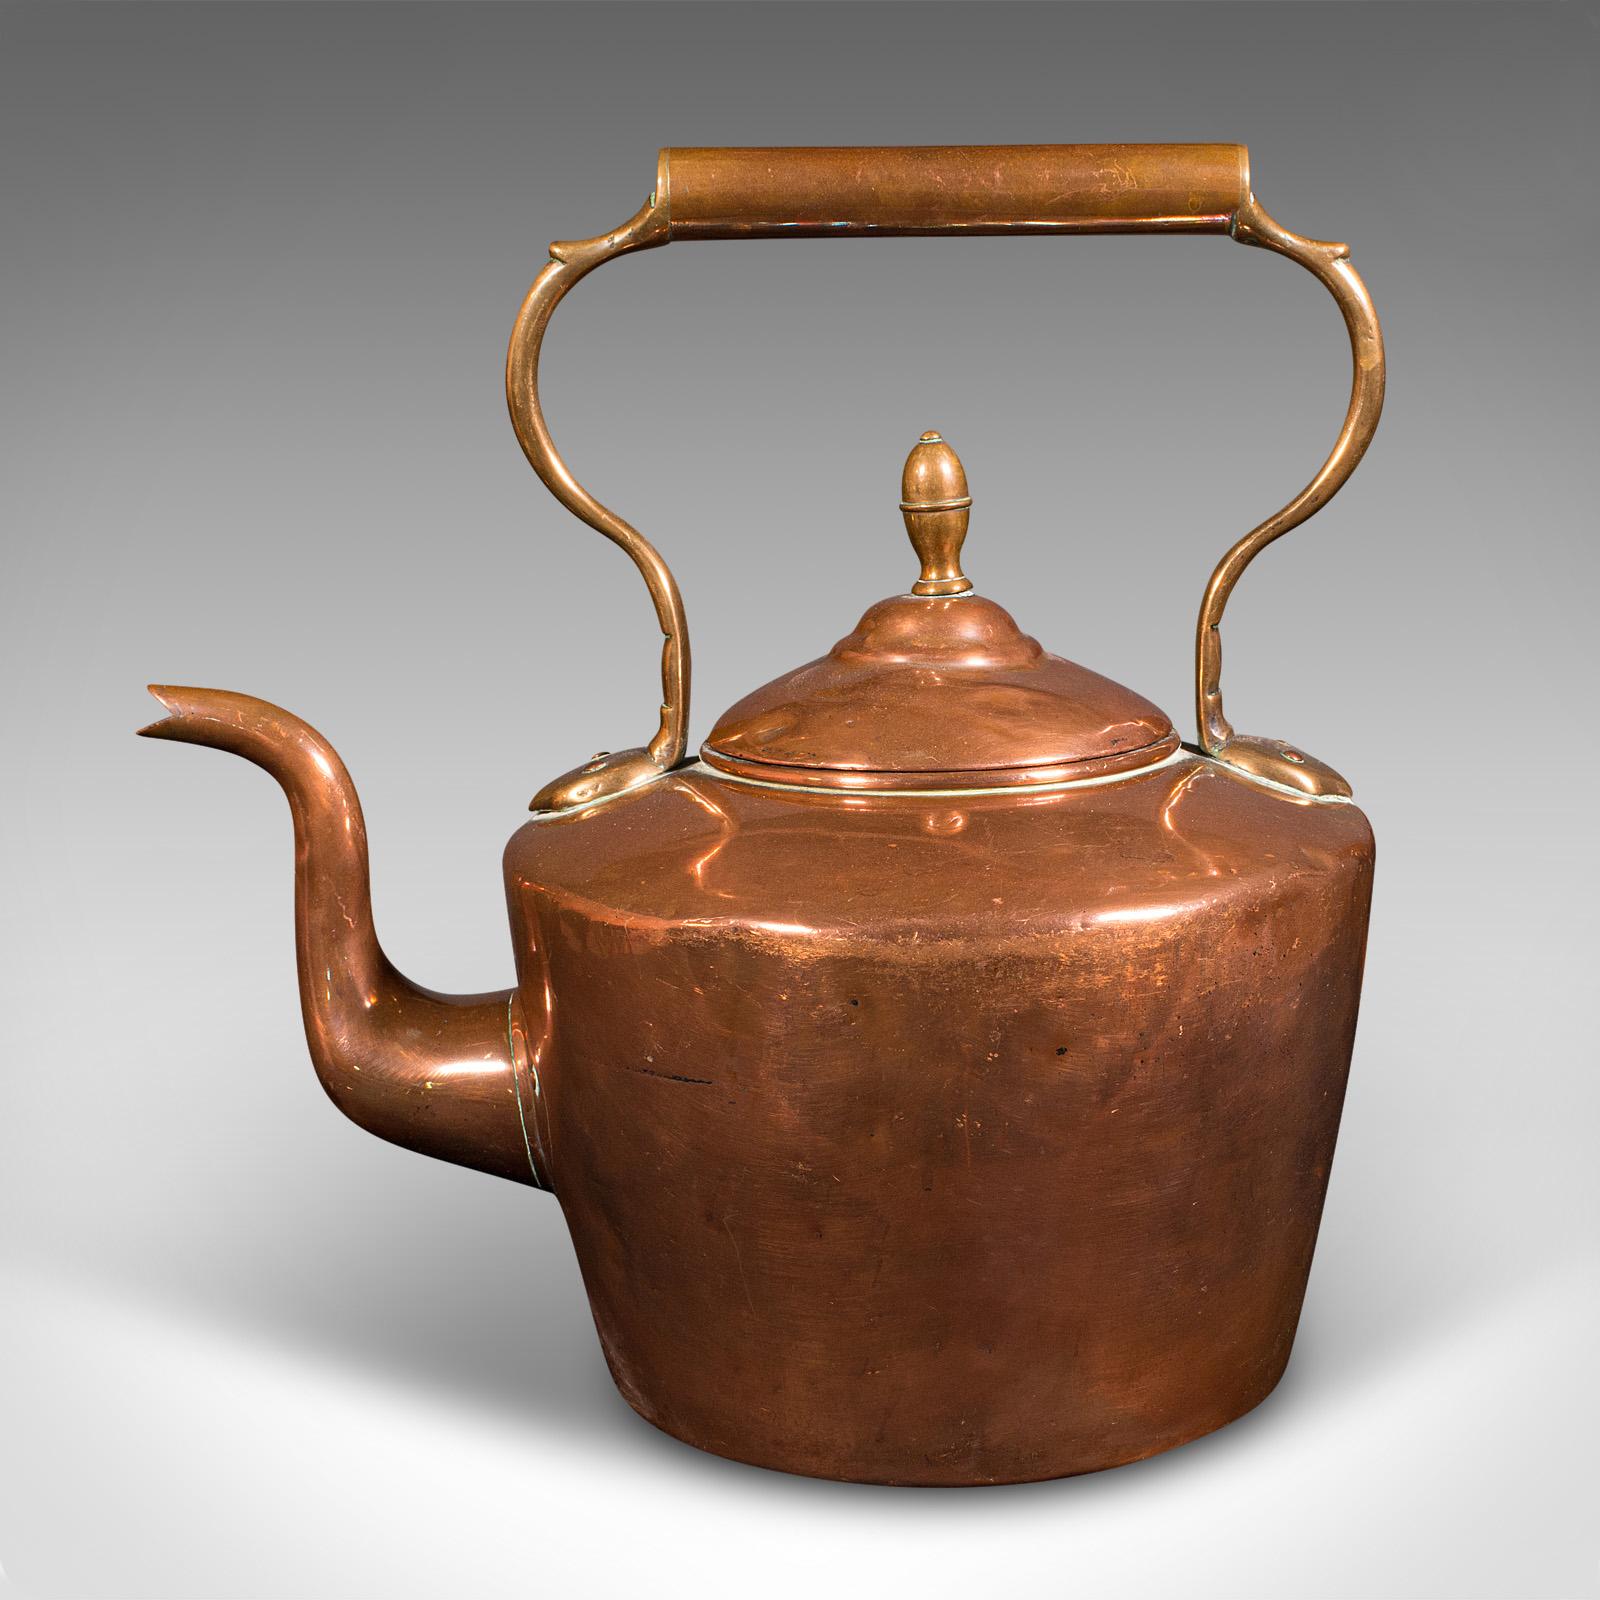 19th Century Antique Fireside Kettle, English Copper, Decorative, Fireplace Teapot, Victorian For Sale